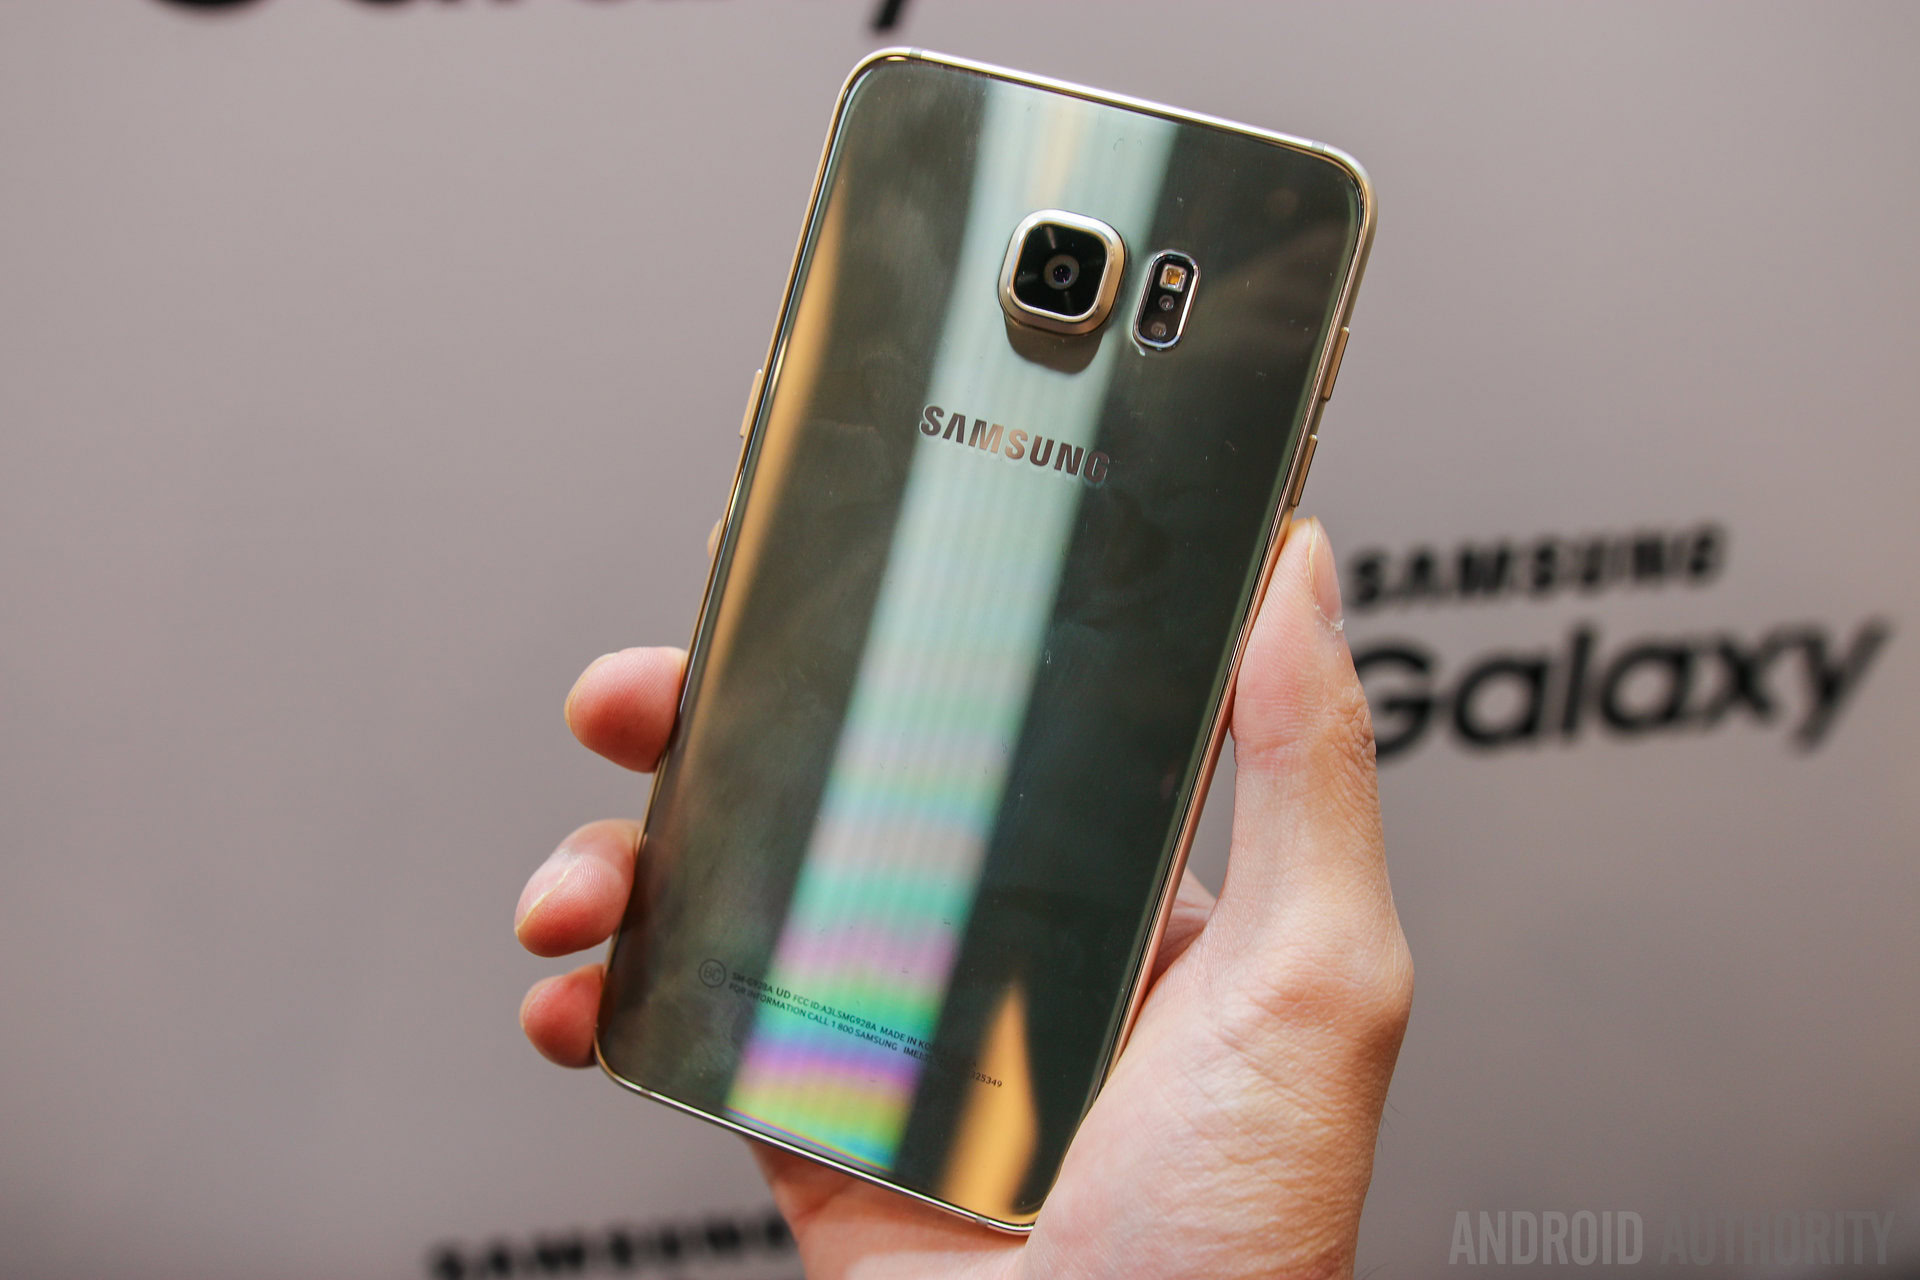 Samsung Galaxy S6 Edge+ hands-on and first impressions